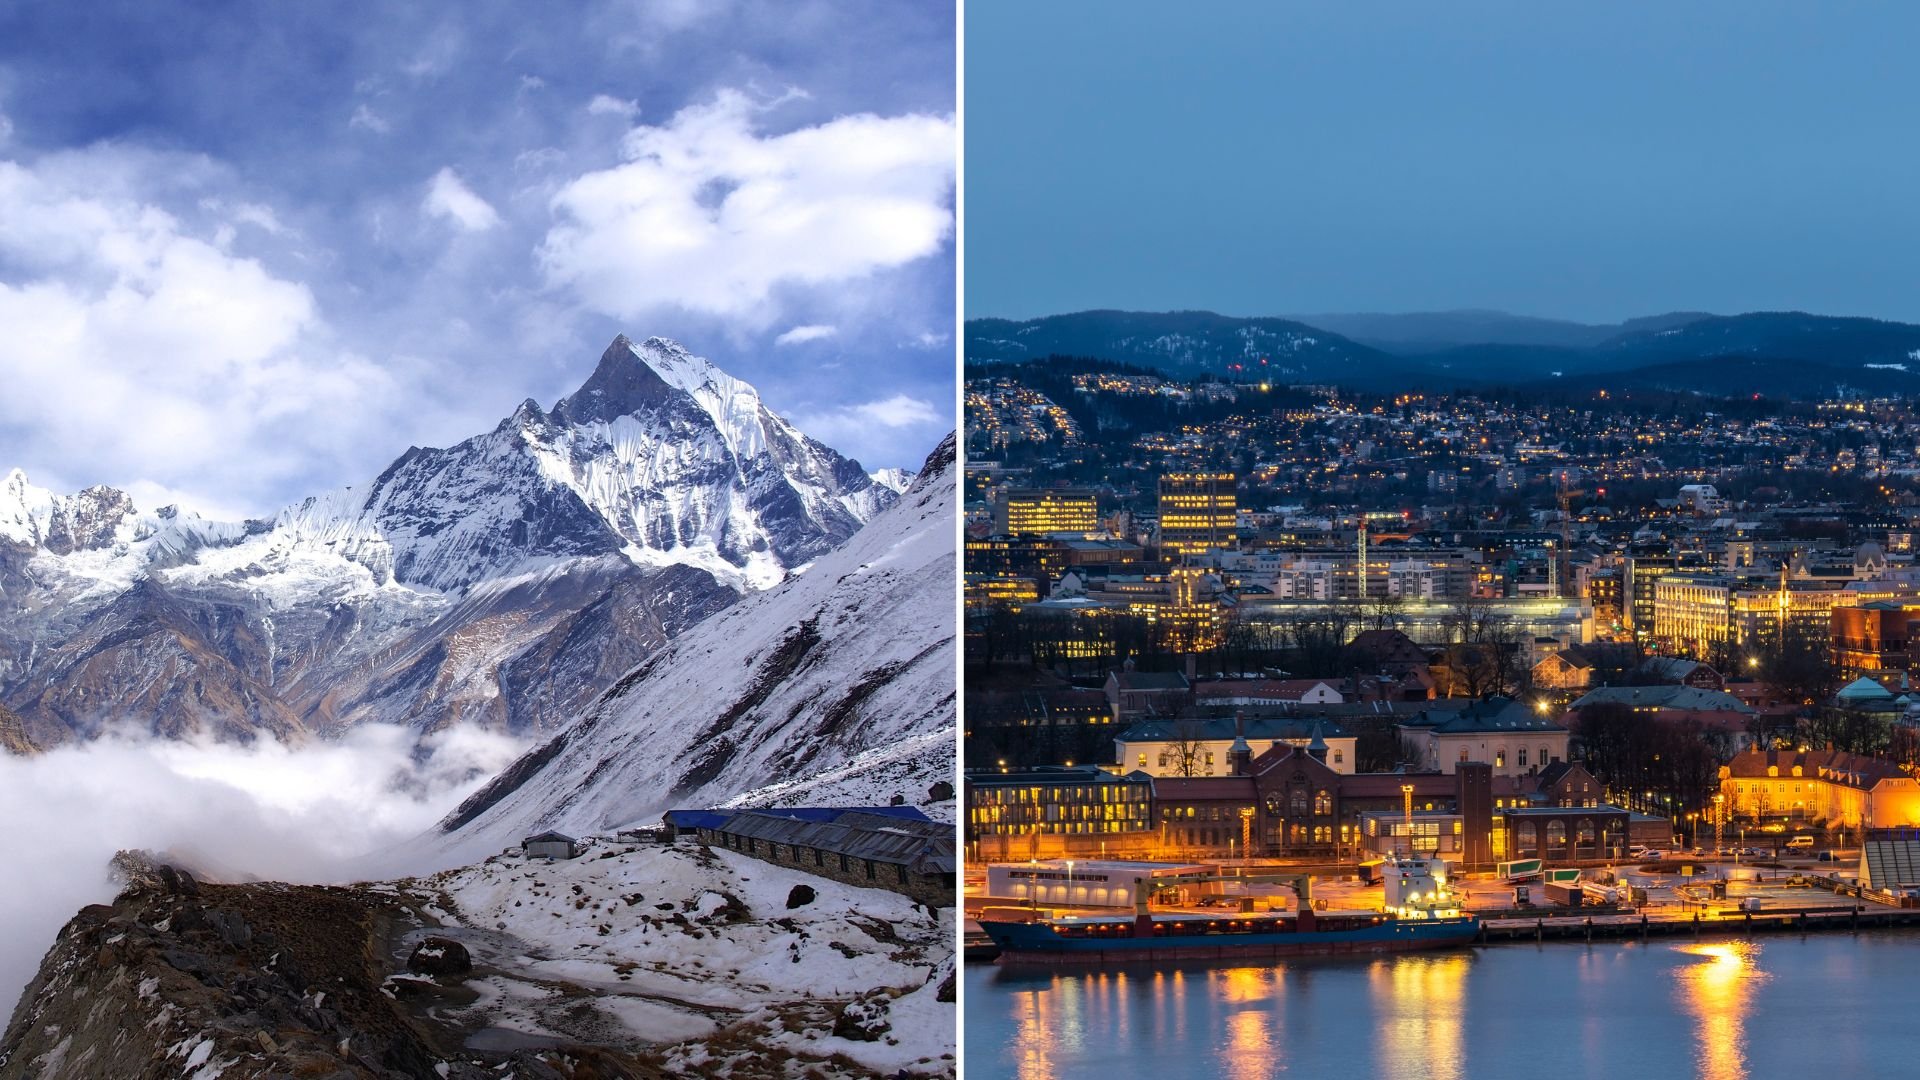 Images of Nepal and Oslo, Norway.